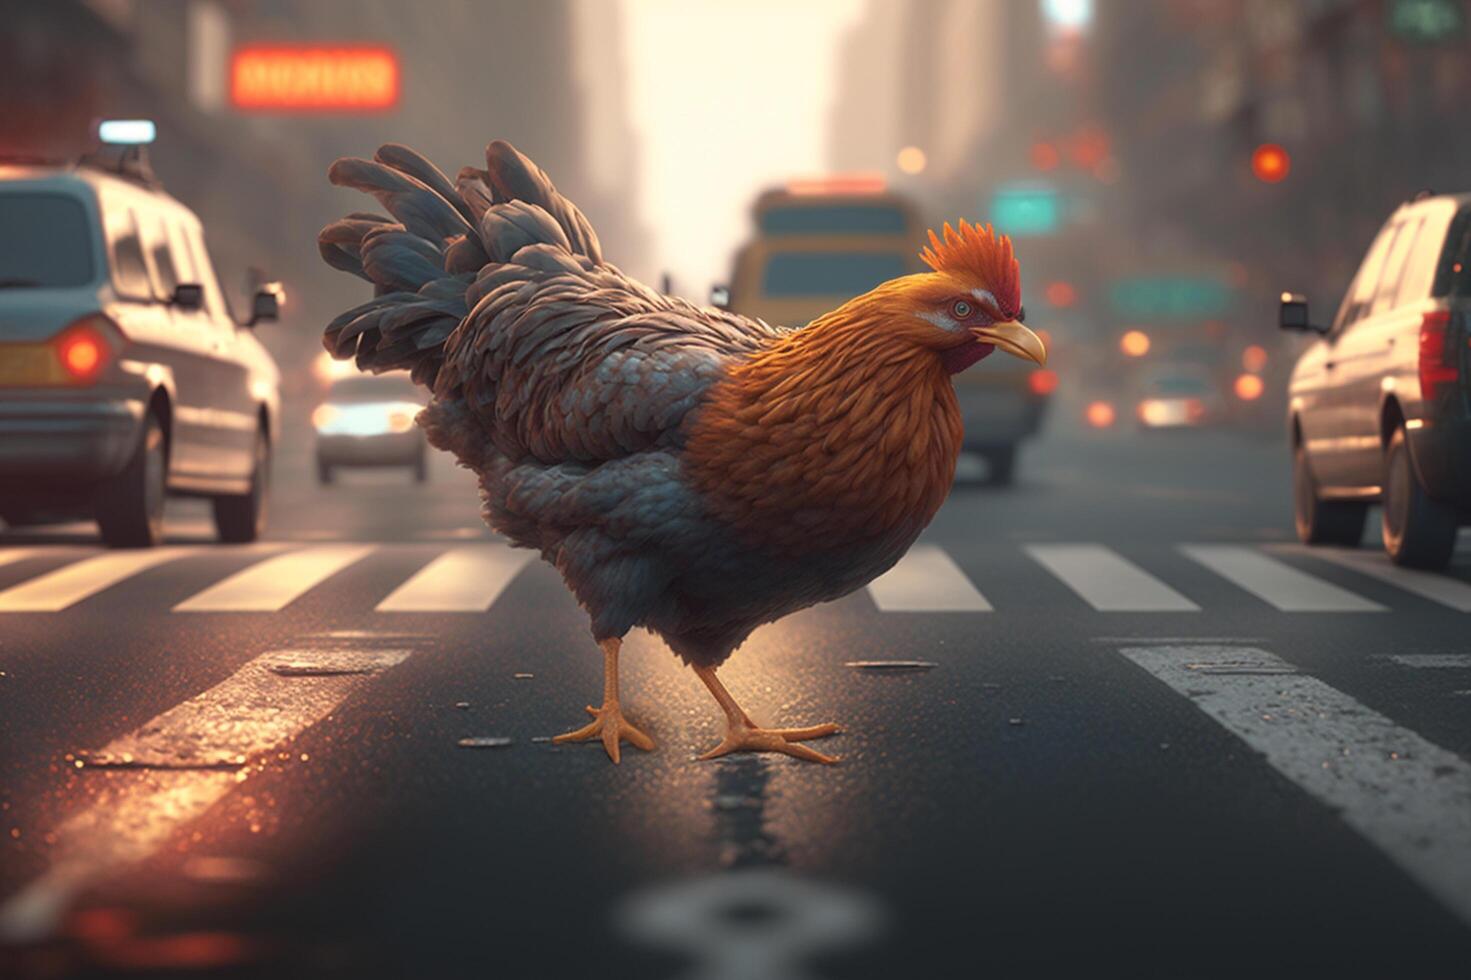 The Brave Chicken Crossing the Busy City Street Amidst the Bright Lights and Cars photo